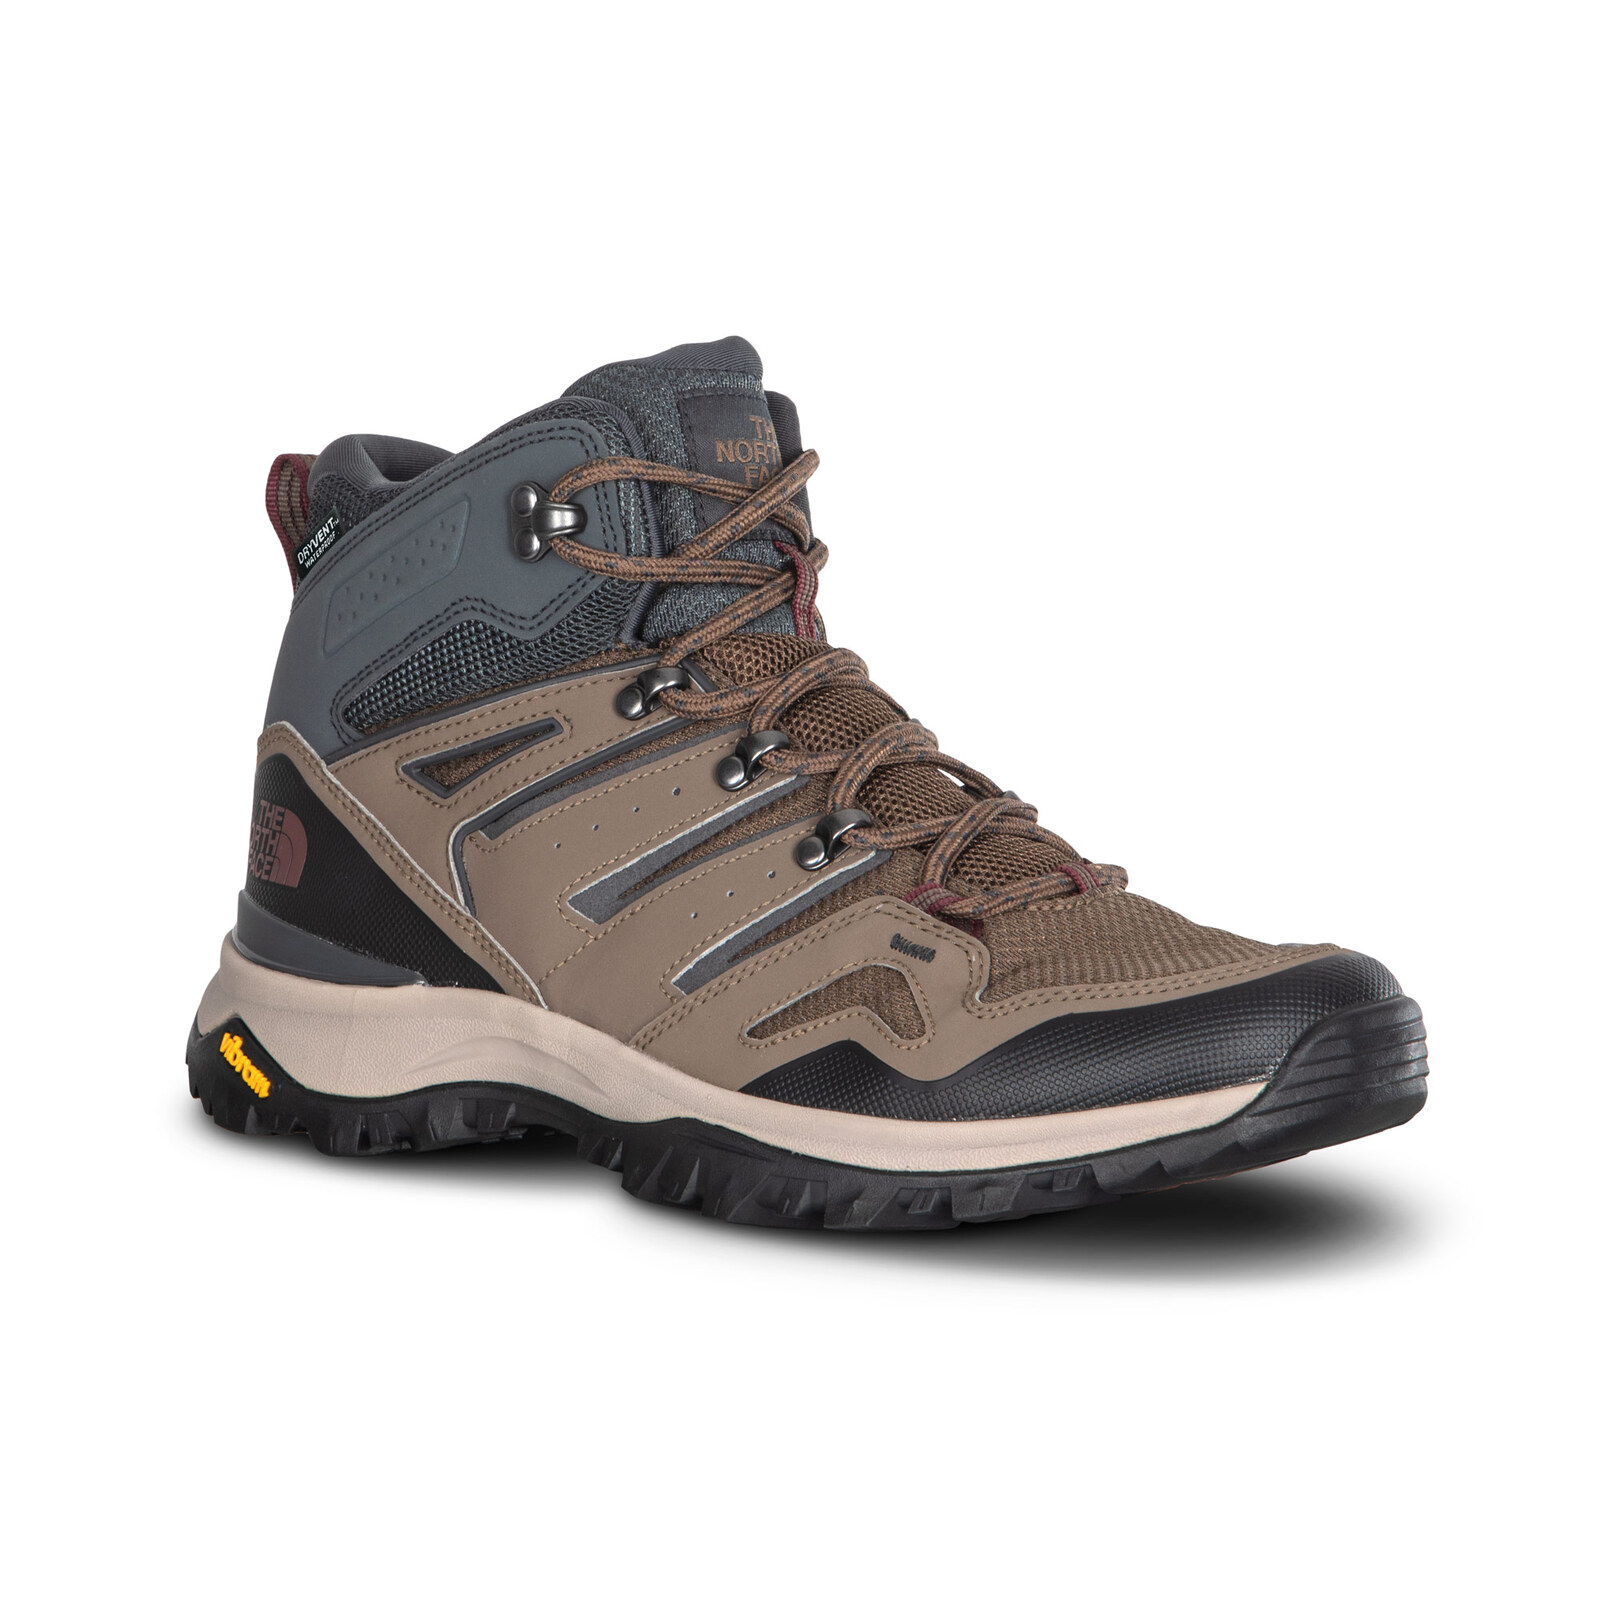 north face mens waterproof shoes